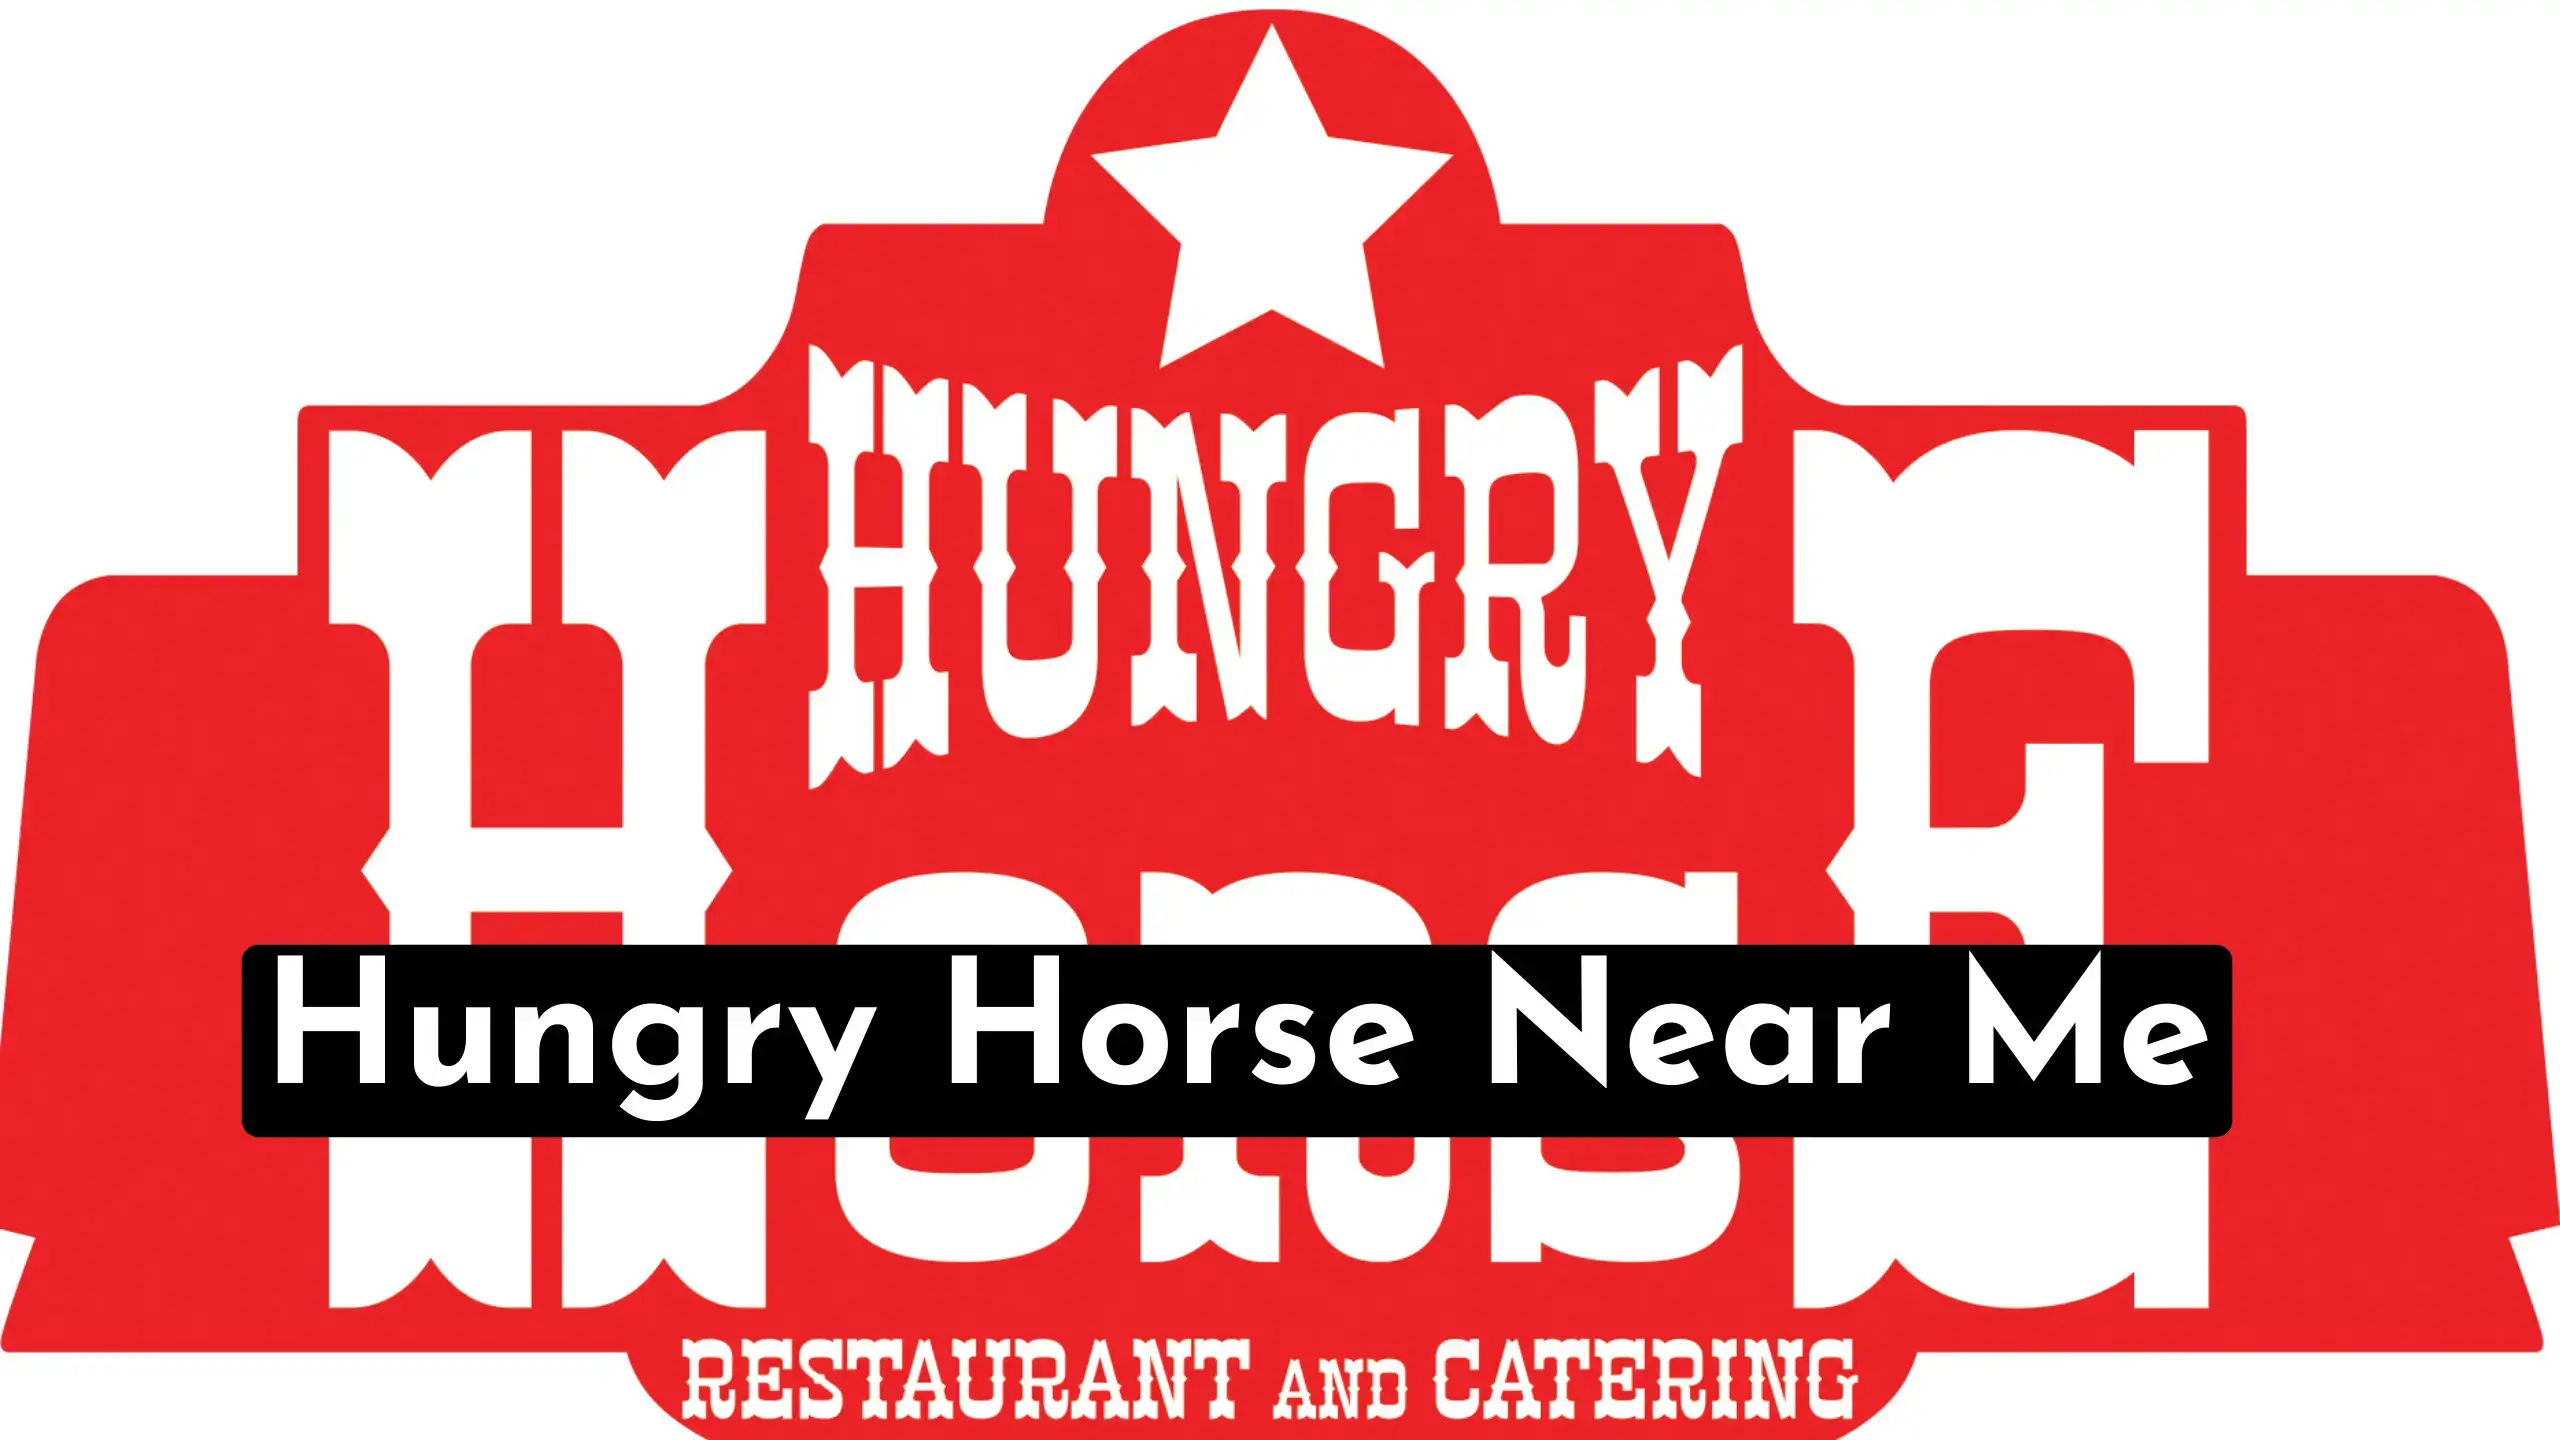 A Quick Way To Find Hungry Horse Near Me Locations | Also Find Whar Are The Special Hungry Horse Menu, Discounts, Offers And Reward Programs.